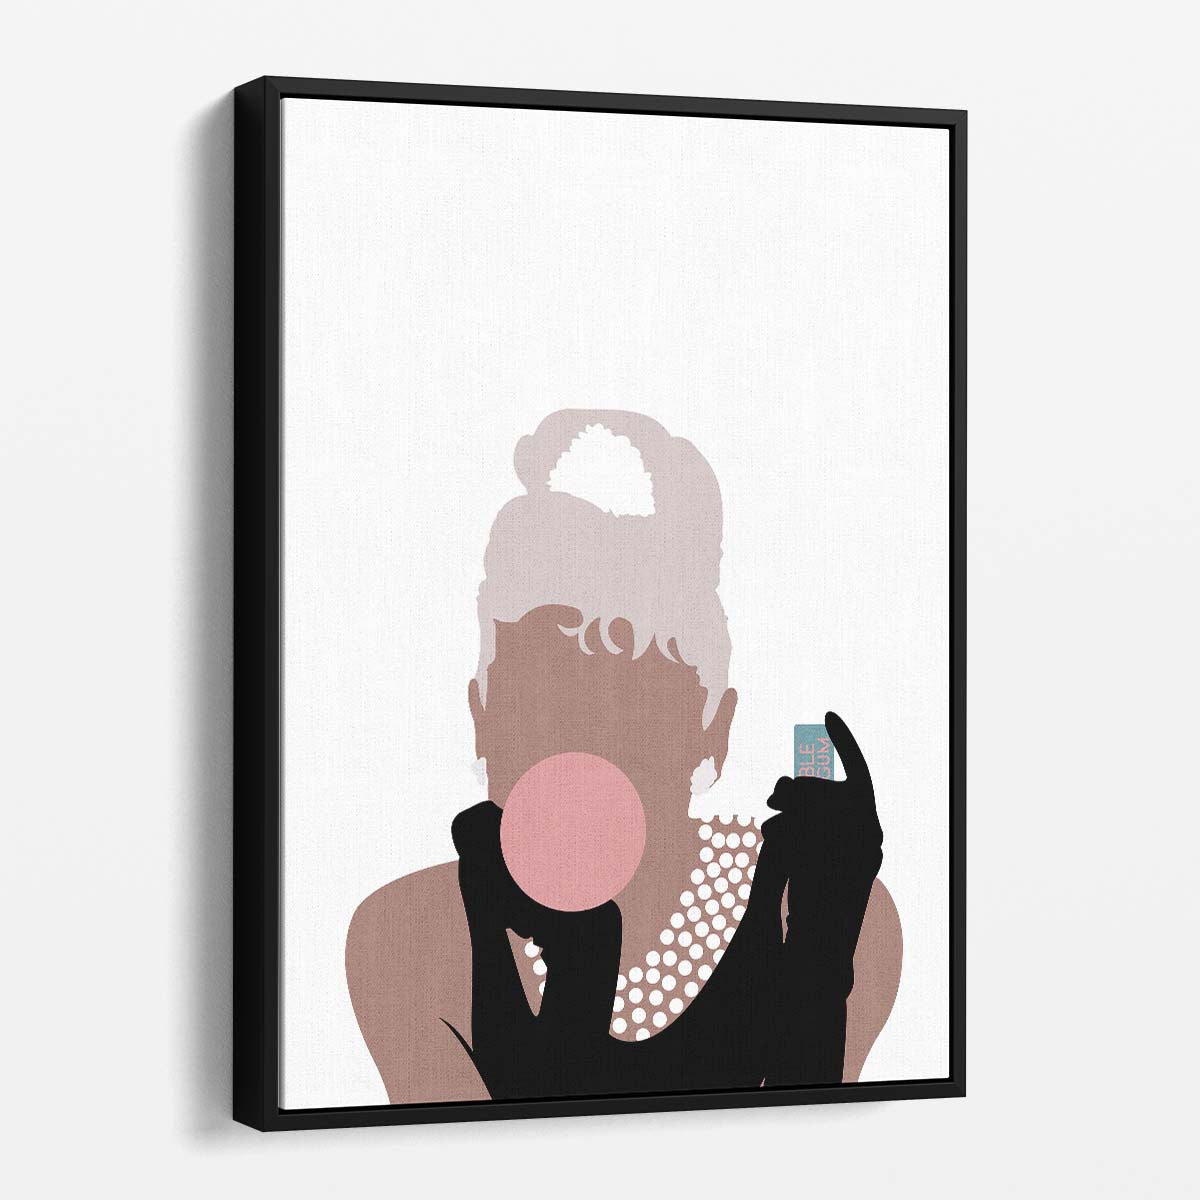 Mid-Century Bubblegum Fashion Girl Illustration with Pearls by Luxuriance Designs, made in USA